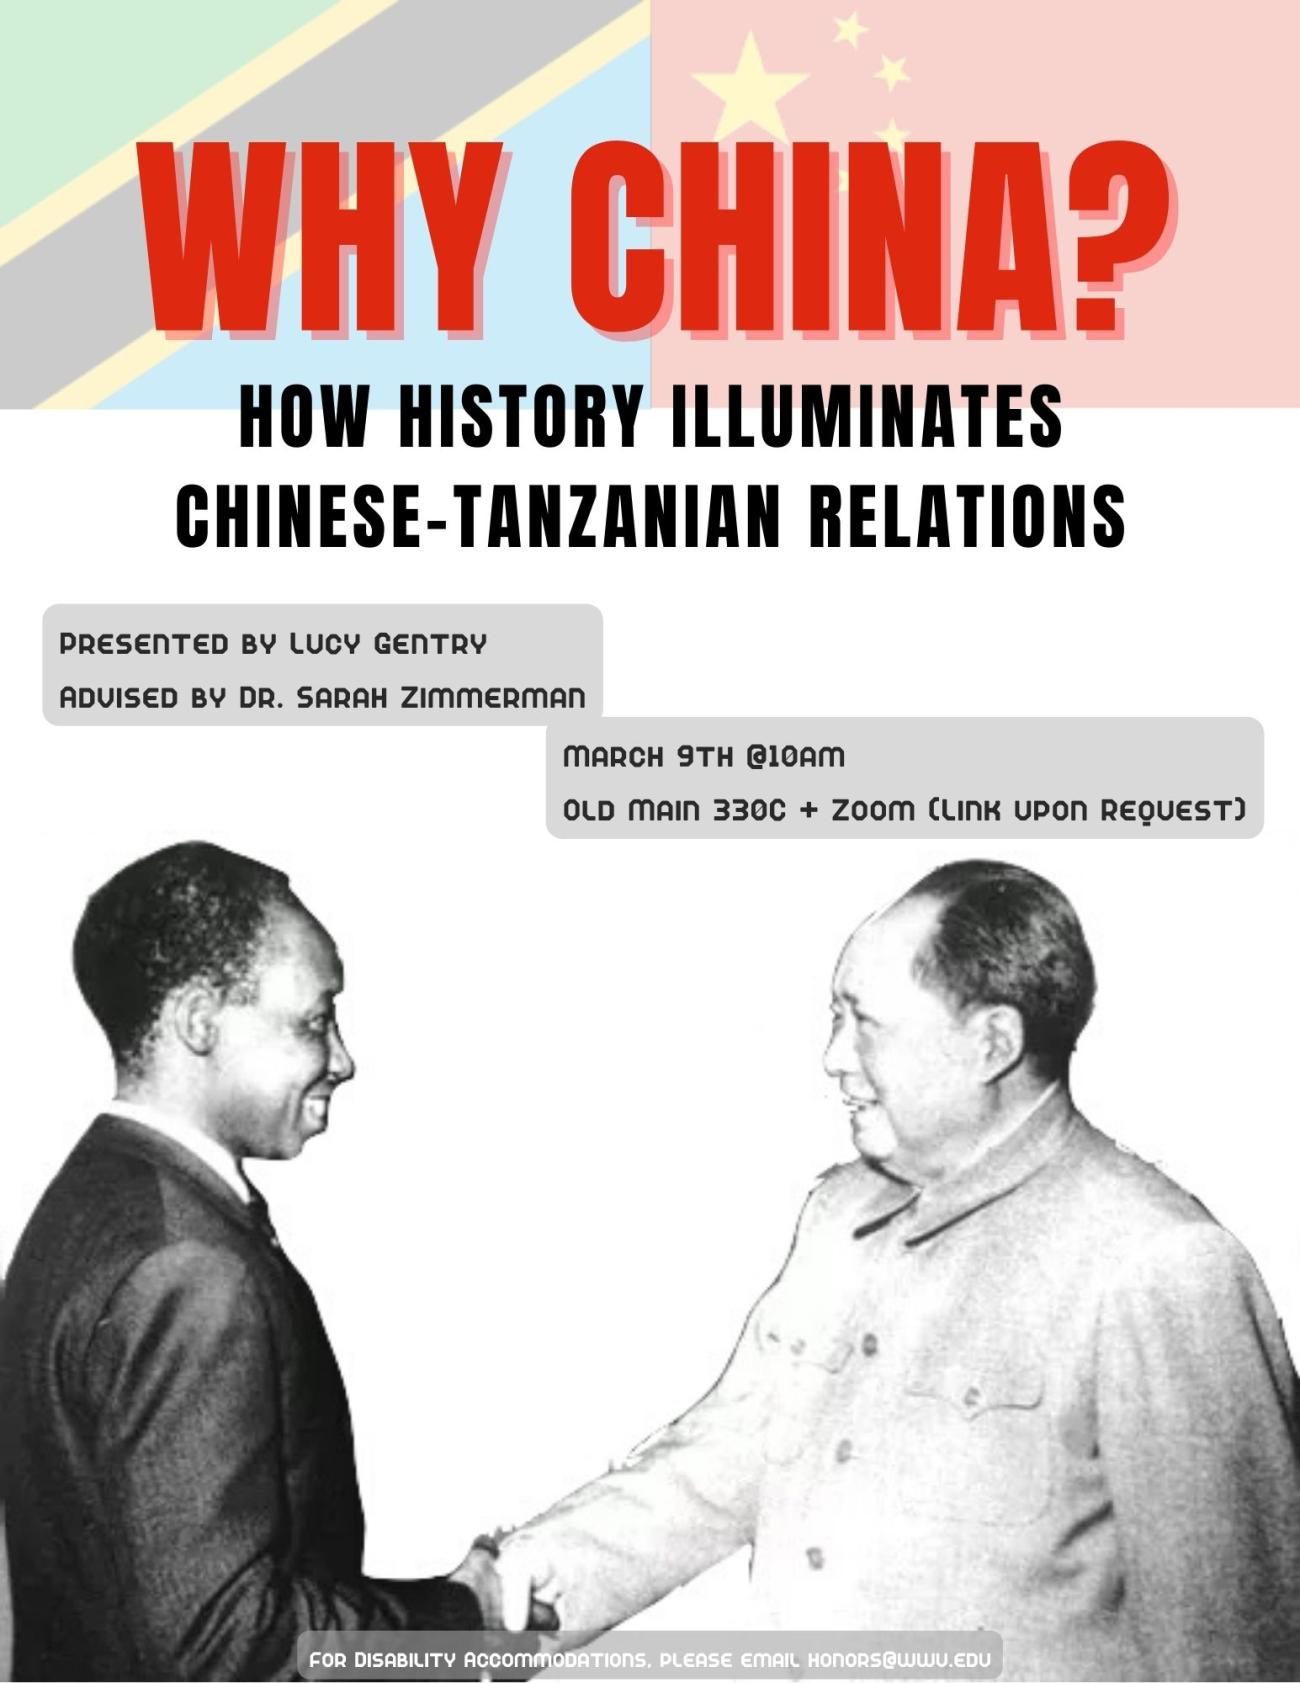 "Why China? How history illuminates Chinese-Tanzanian relations." Former President of the People’s Republic of China, Mao Zedong, shaking hands with former Tanzanian president, Julius Nyerere. Tanzanian and Chinese flags in the background.